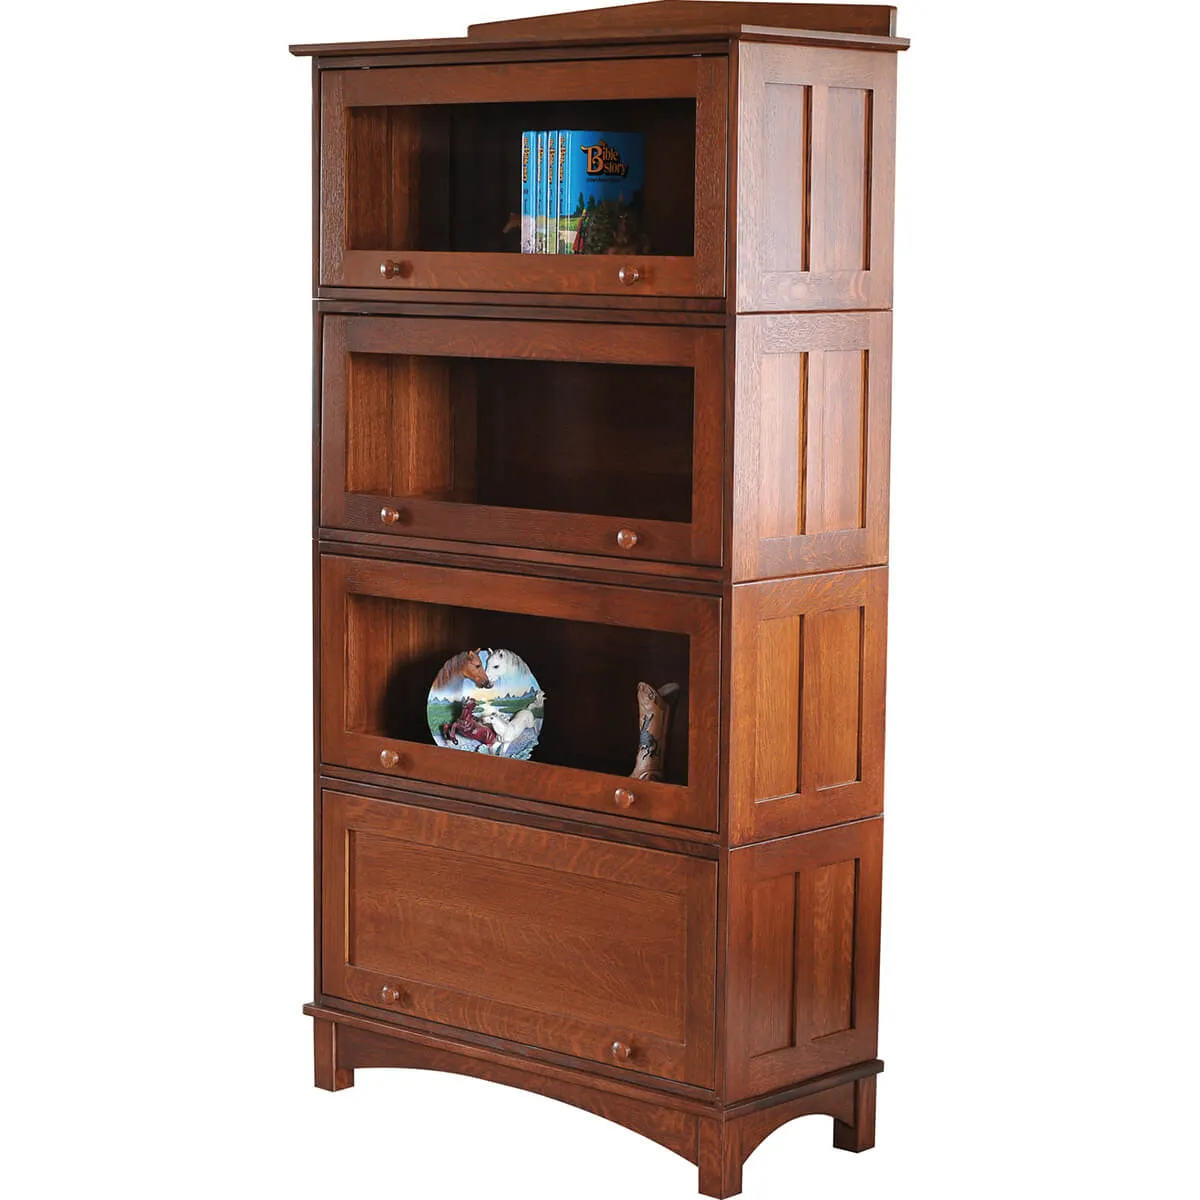 Barrister Bookcase - Stackable Unit 4